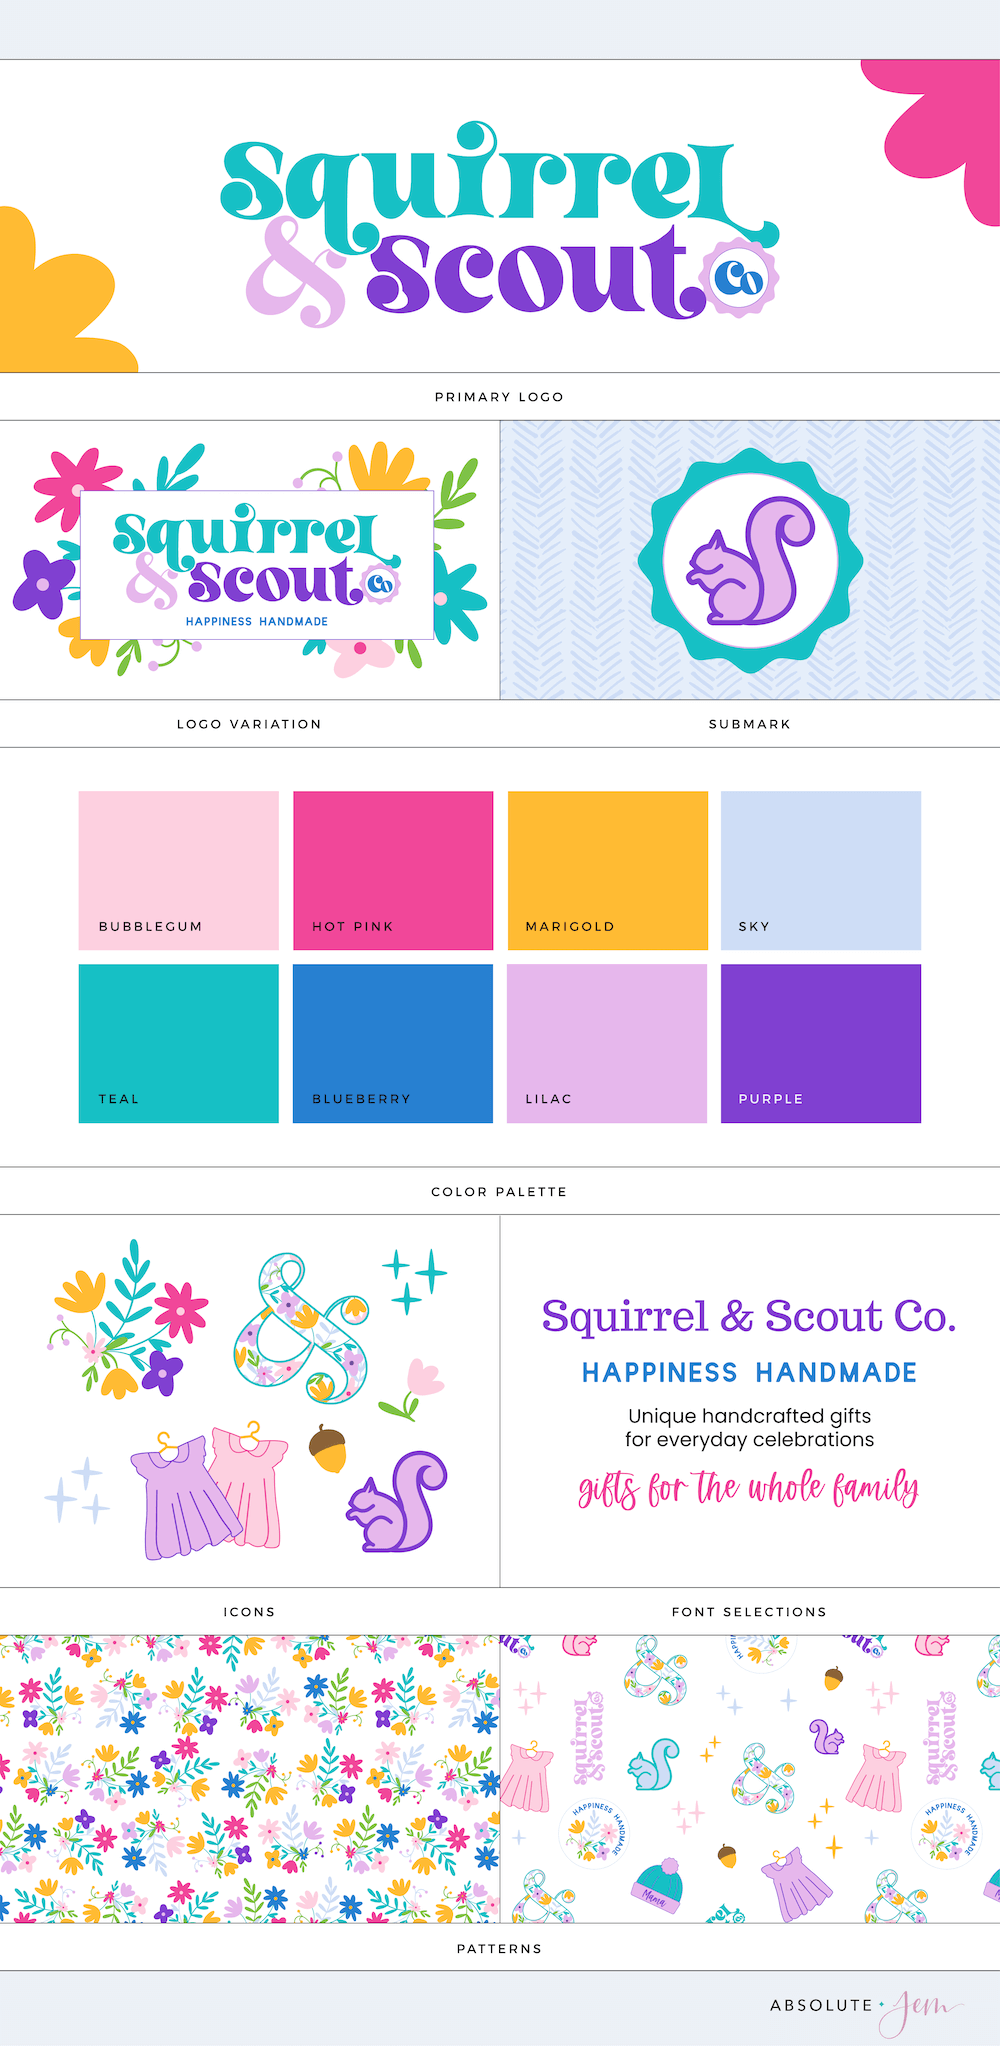 Squirrel and Scout Co Brand Board by Absolute JEM